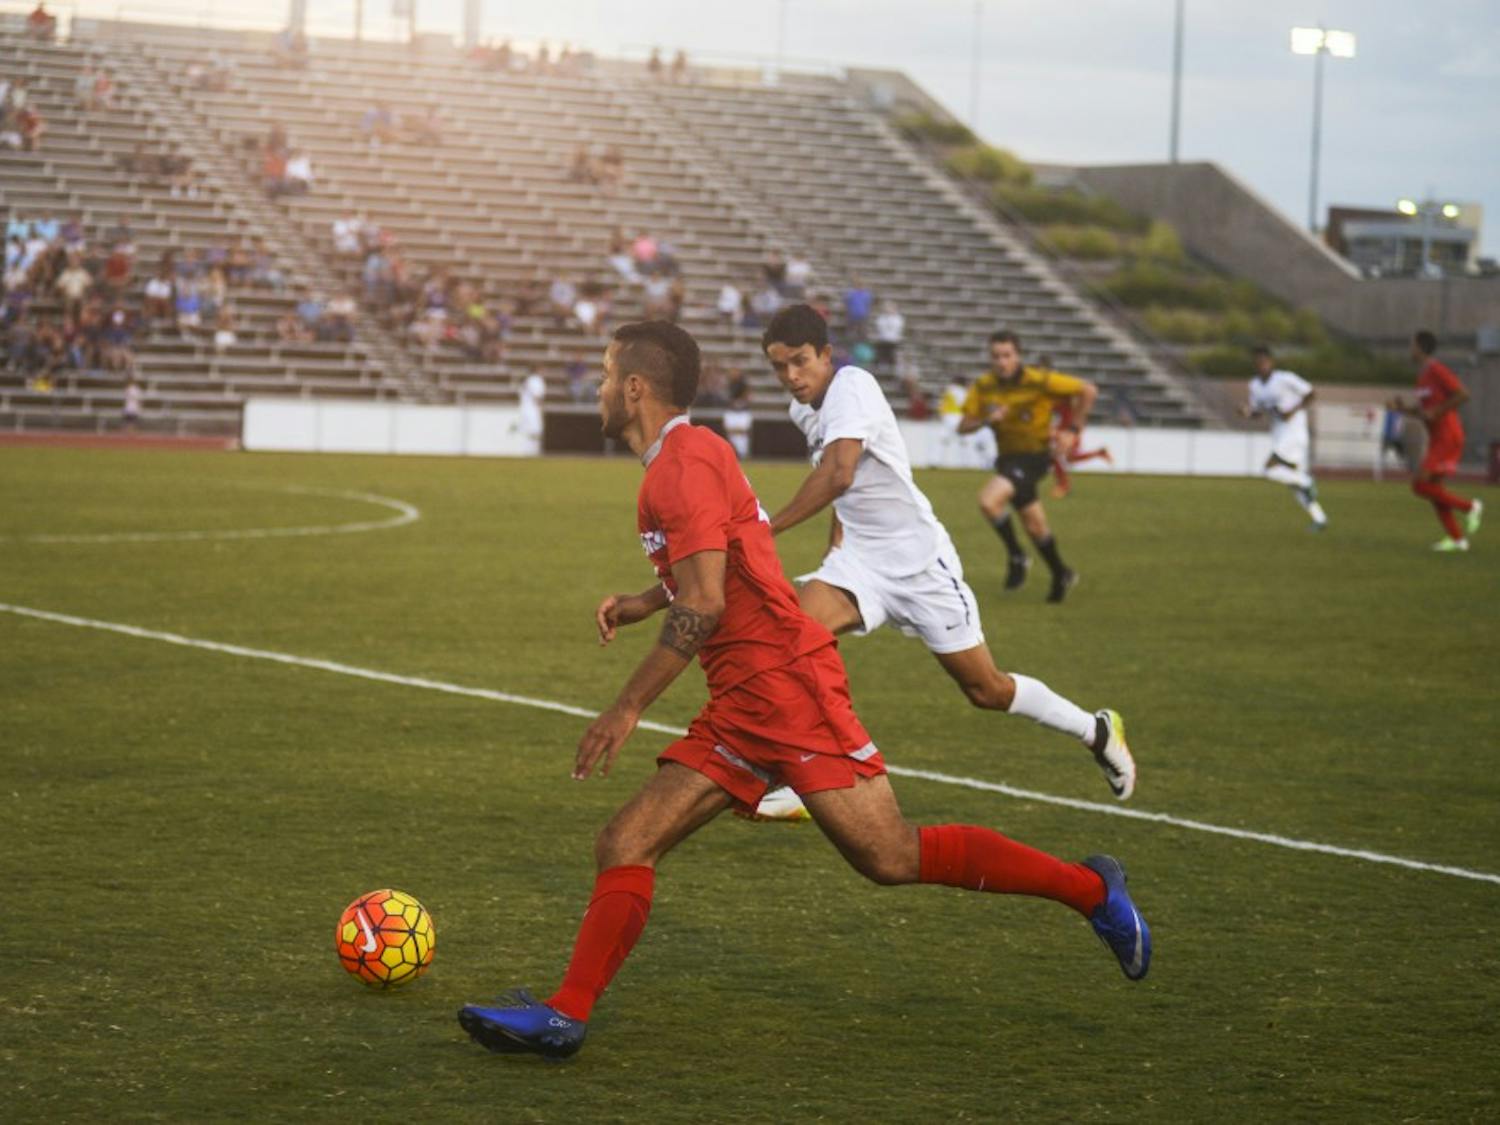 Senior forward Niko Hansen looks down field as he drives to Washington Universitie's net during an exhibition on Saturday, August 20, 2016 at the UNM Soccer Complex. The Lobos are winless to begin the season after losing to Indiana and Notre Dame over the weekend.&nbsp;